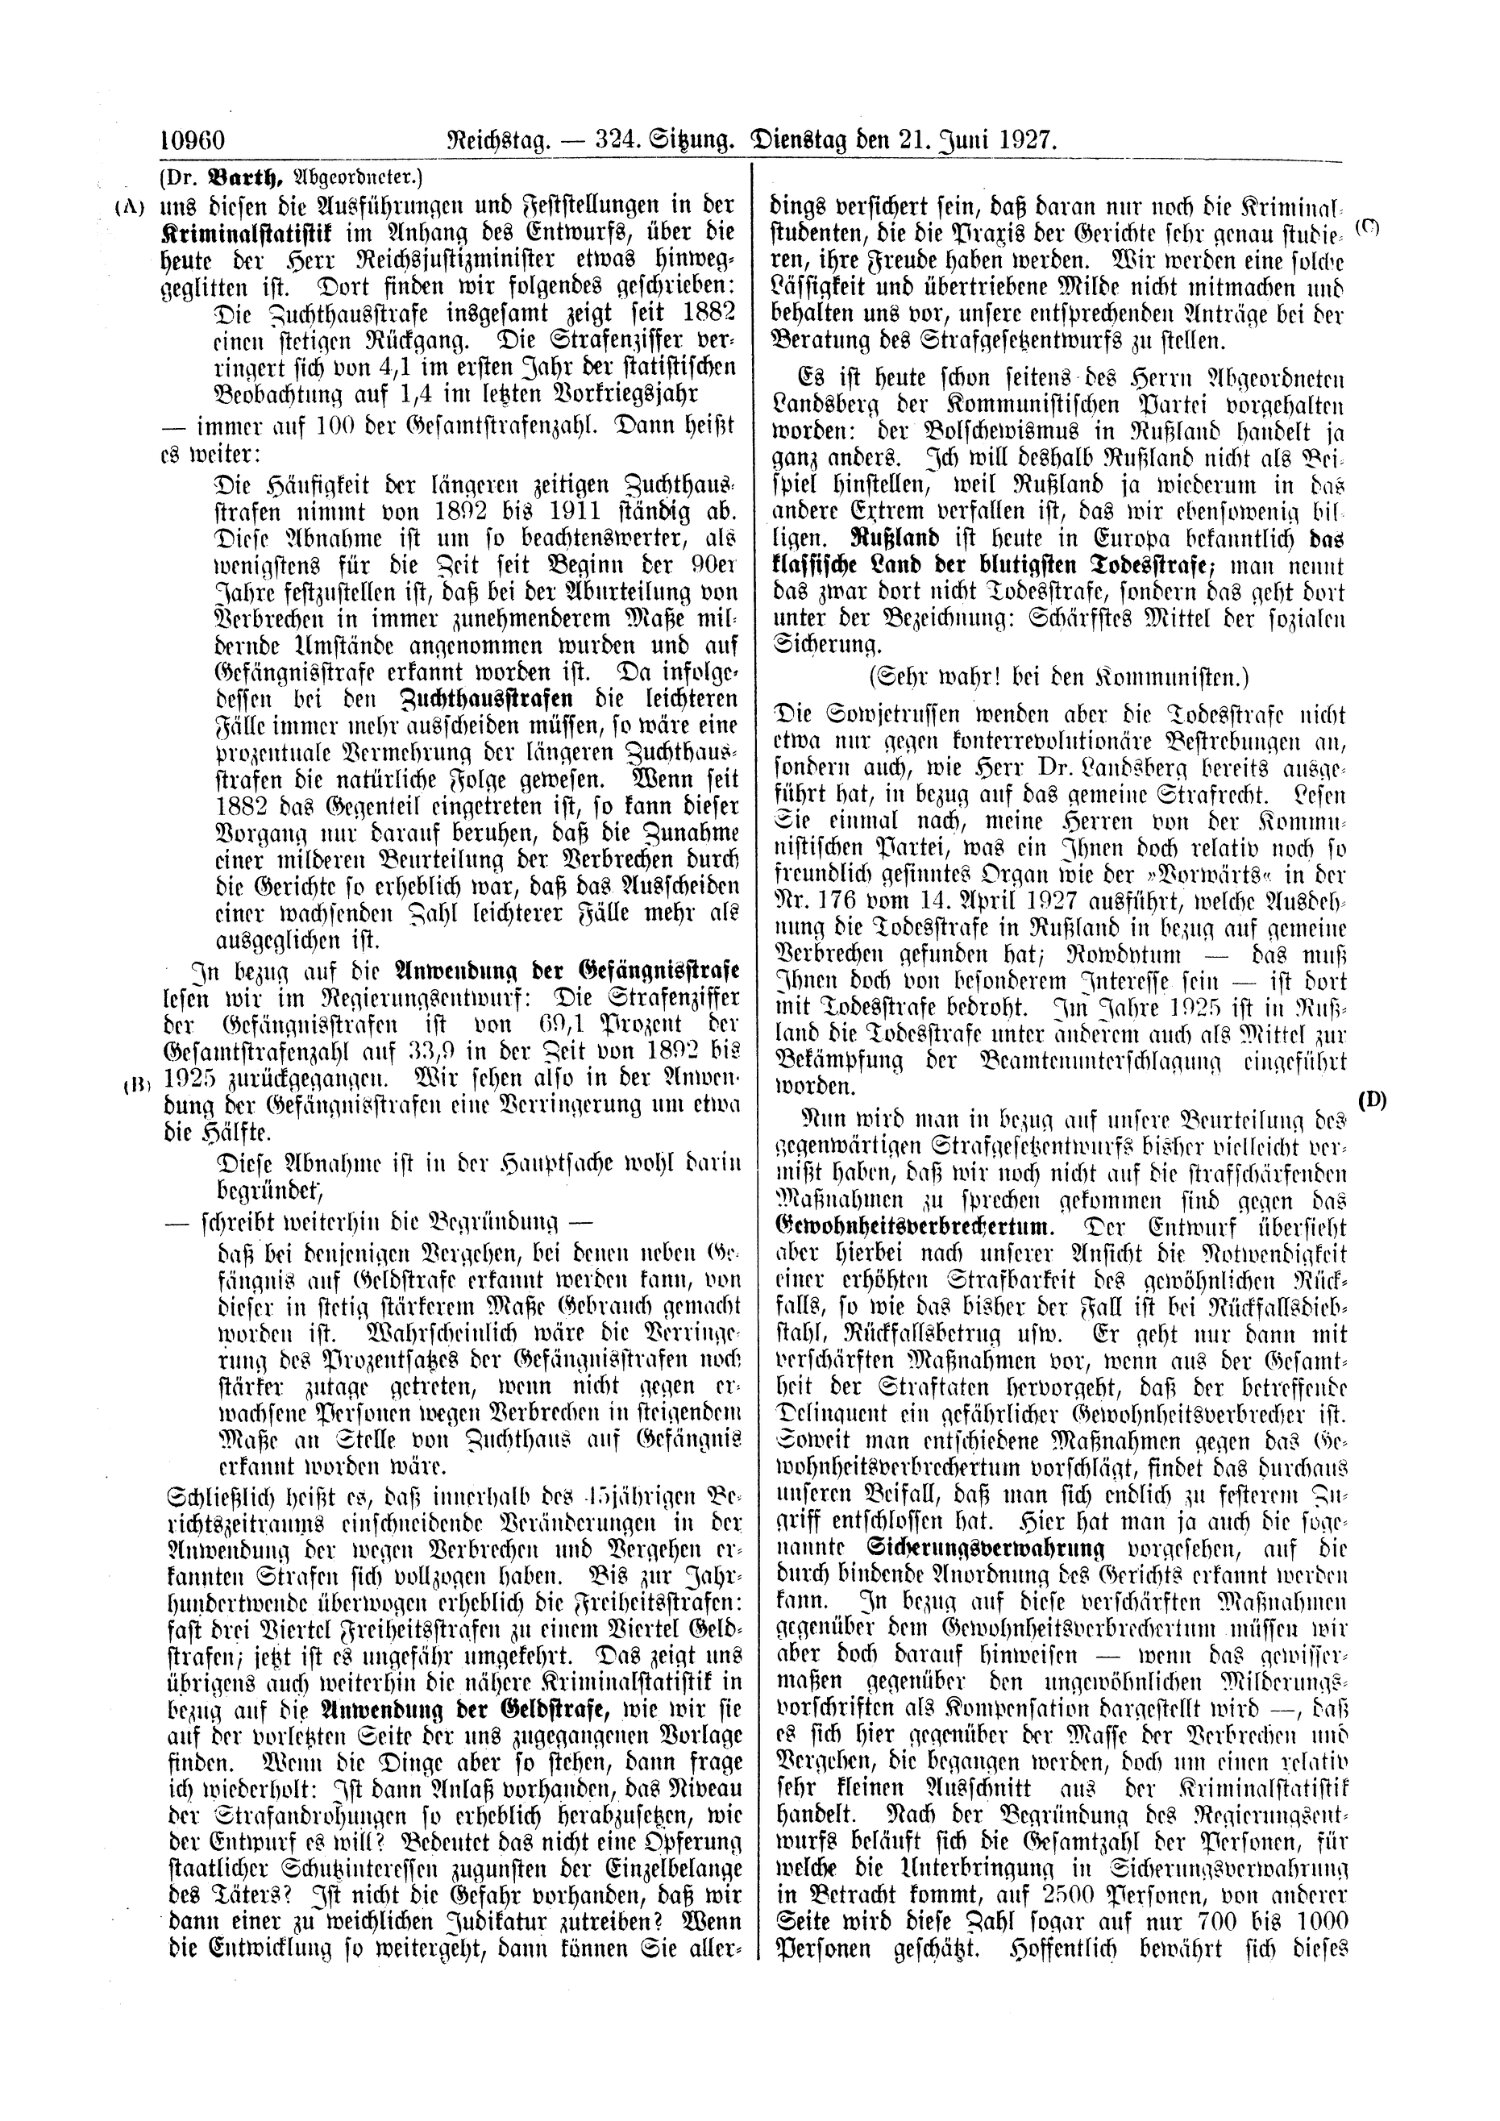 Scan of page 10960